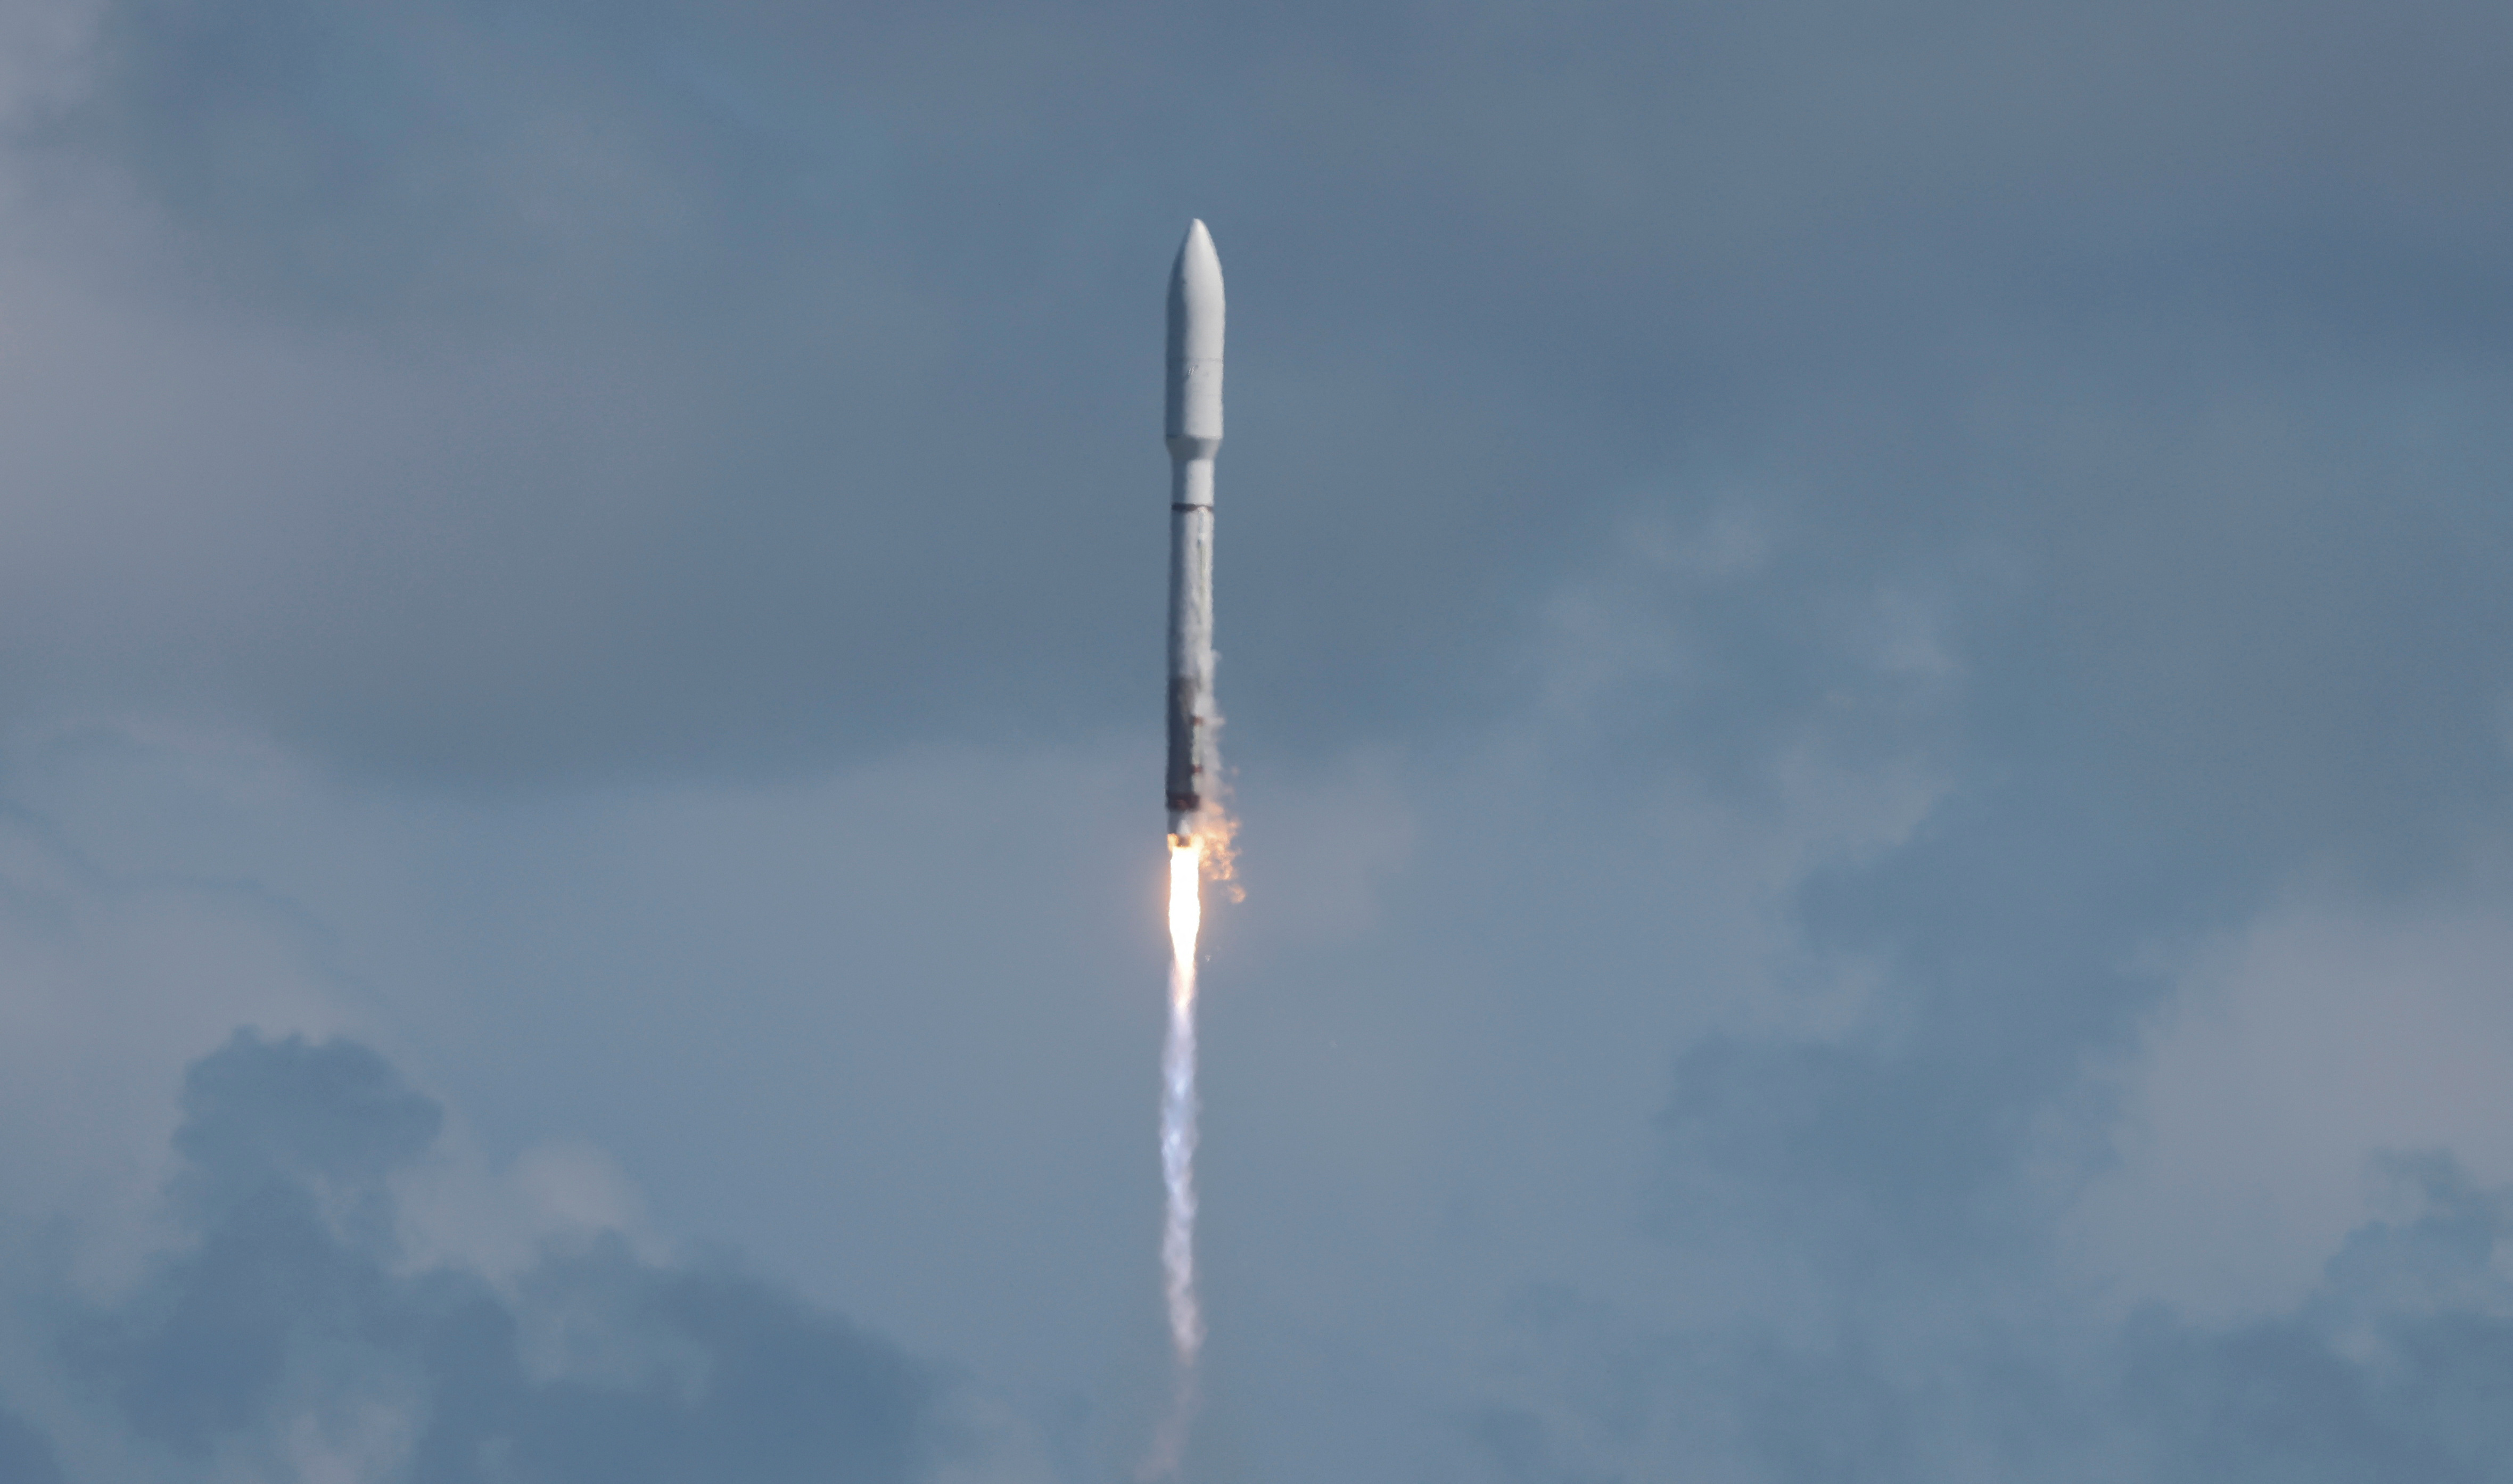 Amazon's internet satellites launched from Cape Canaveral